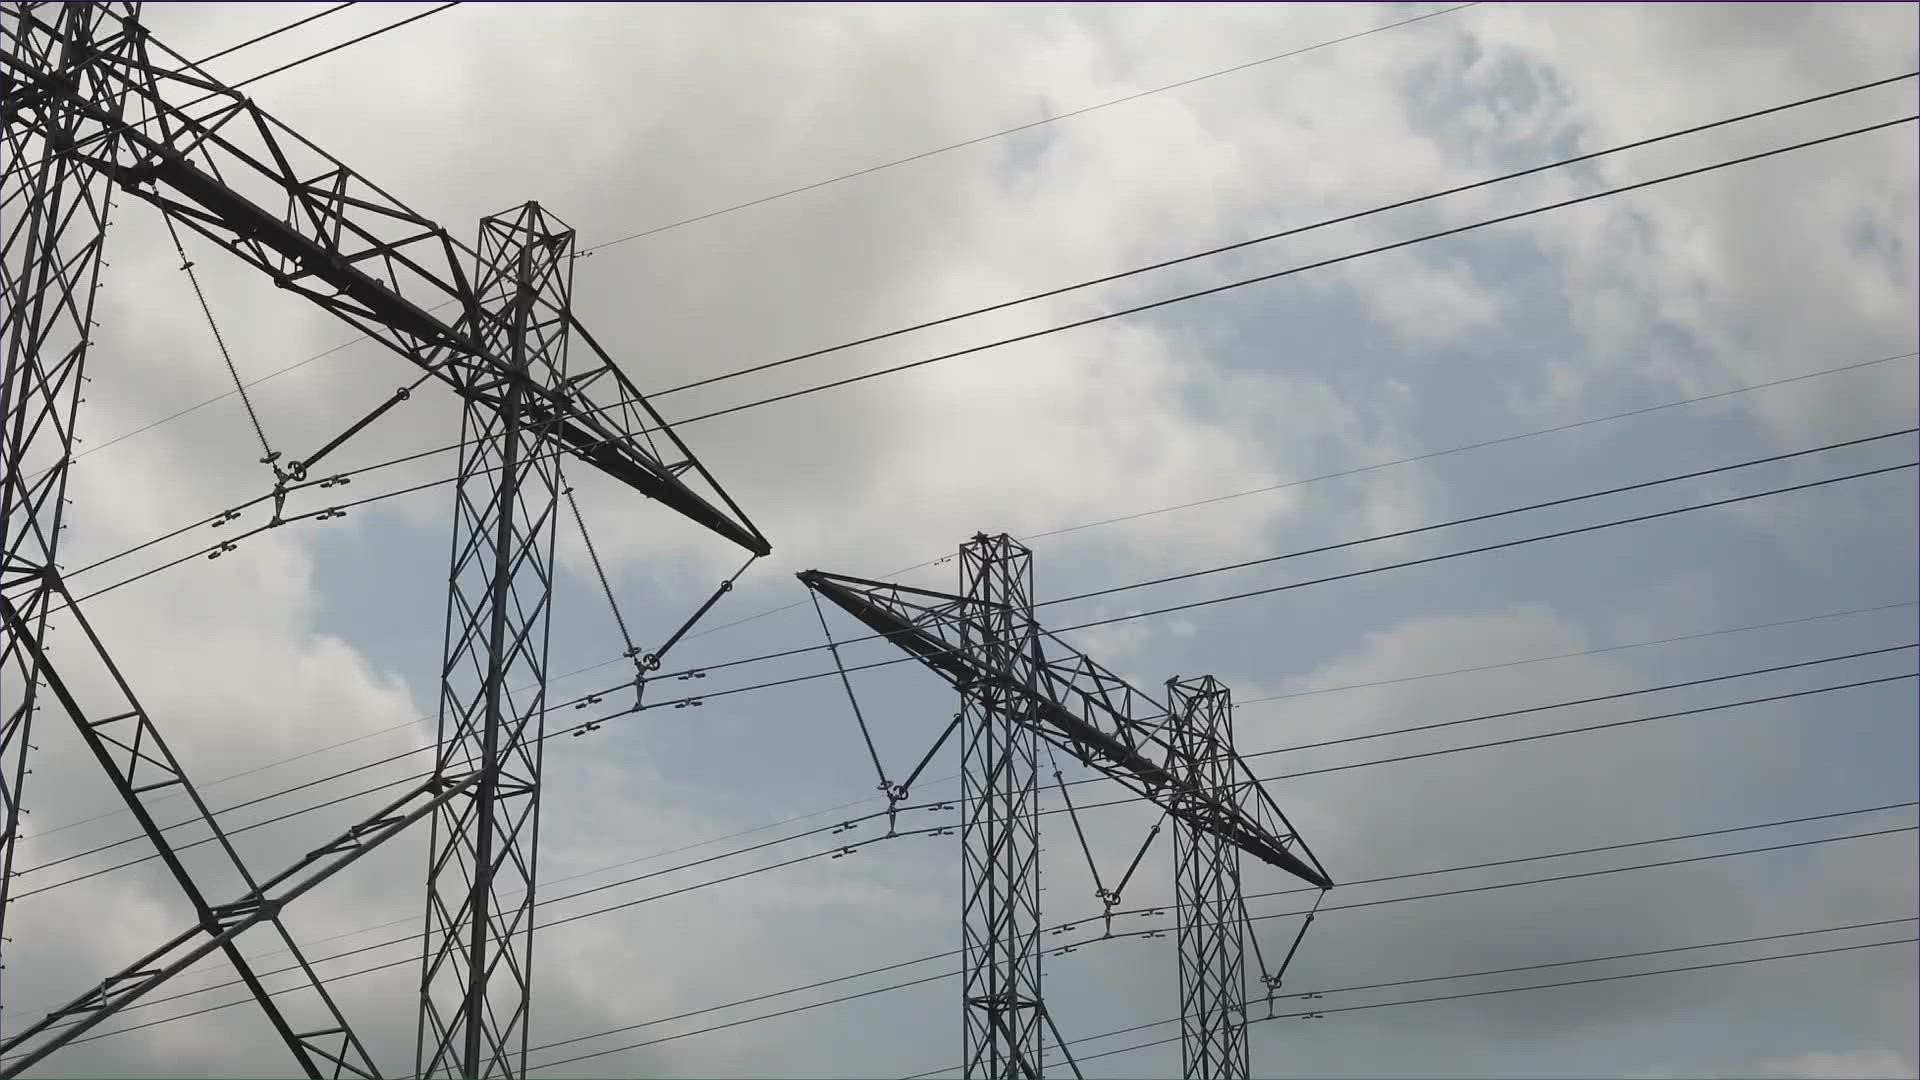 A report from the Federal Energy Regulatory Commission found the Texas power grid is as vulnerable as it was during the deadly winter storm.